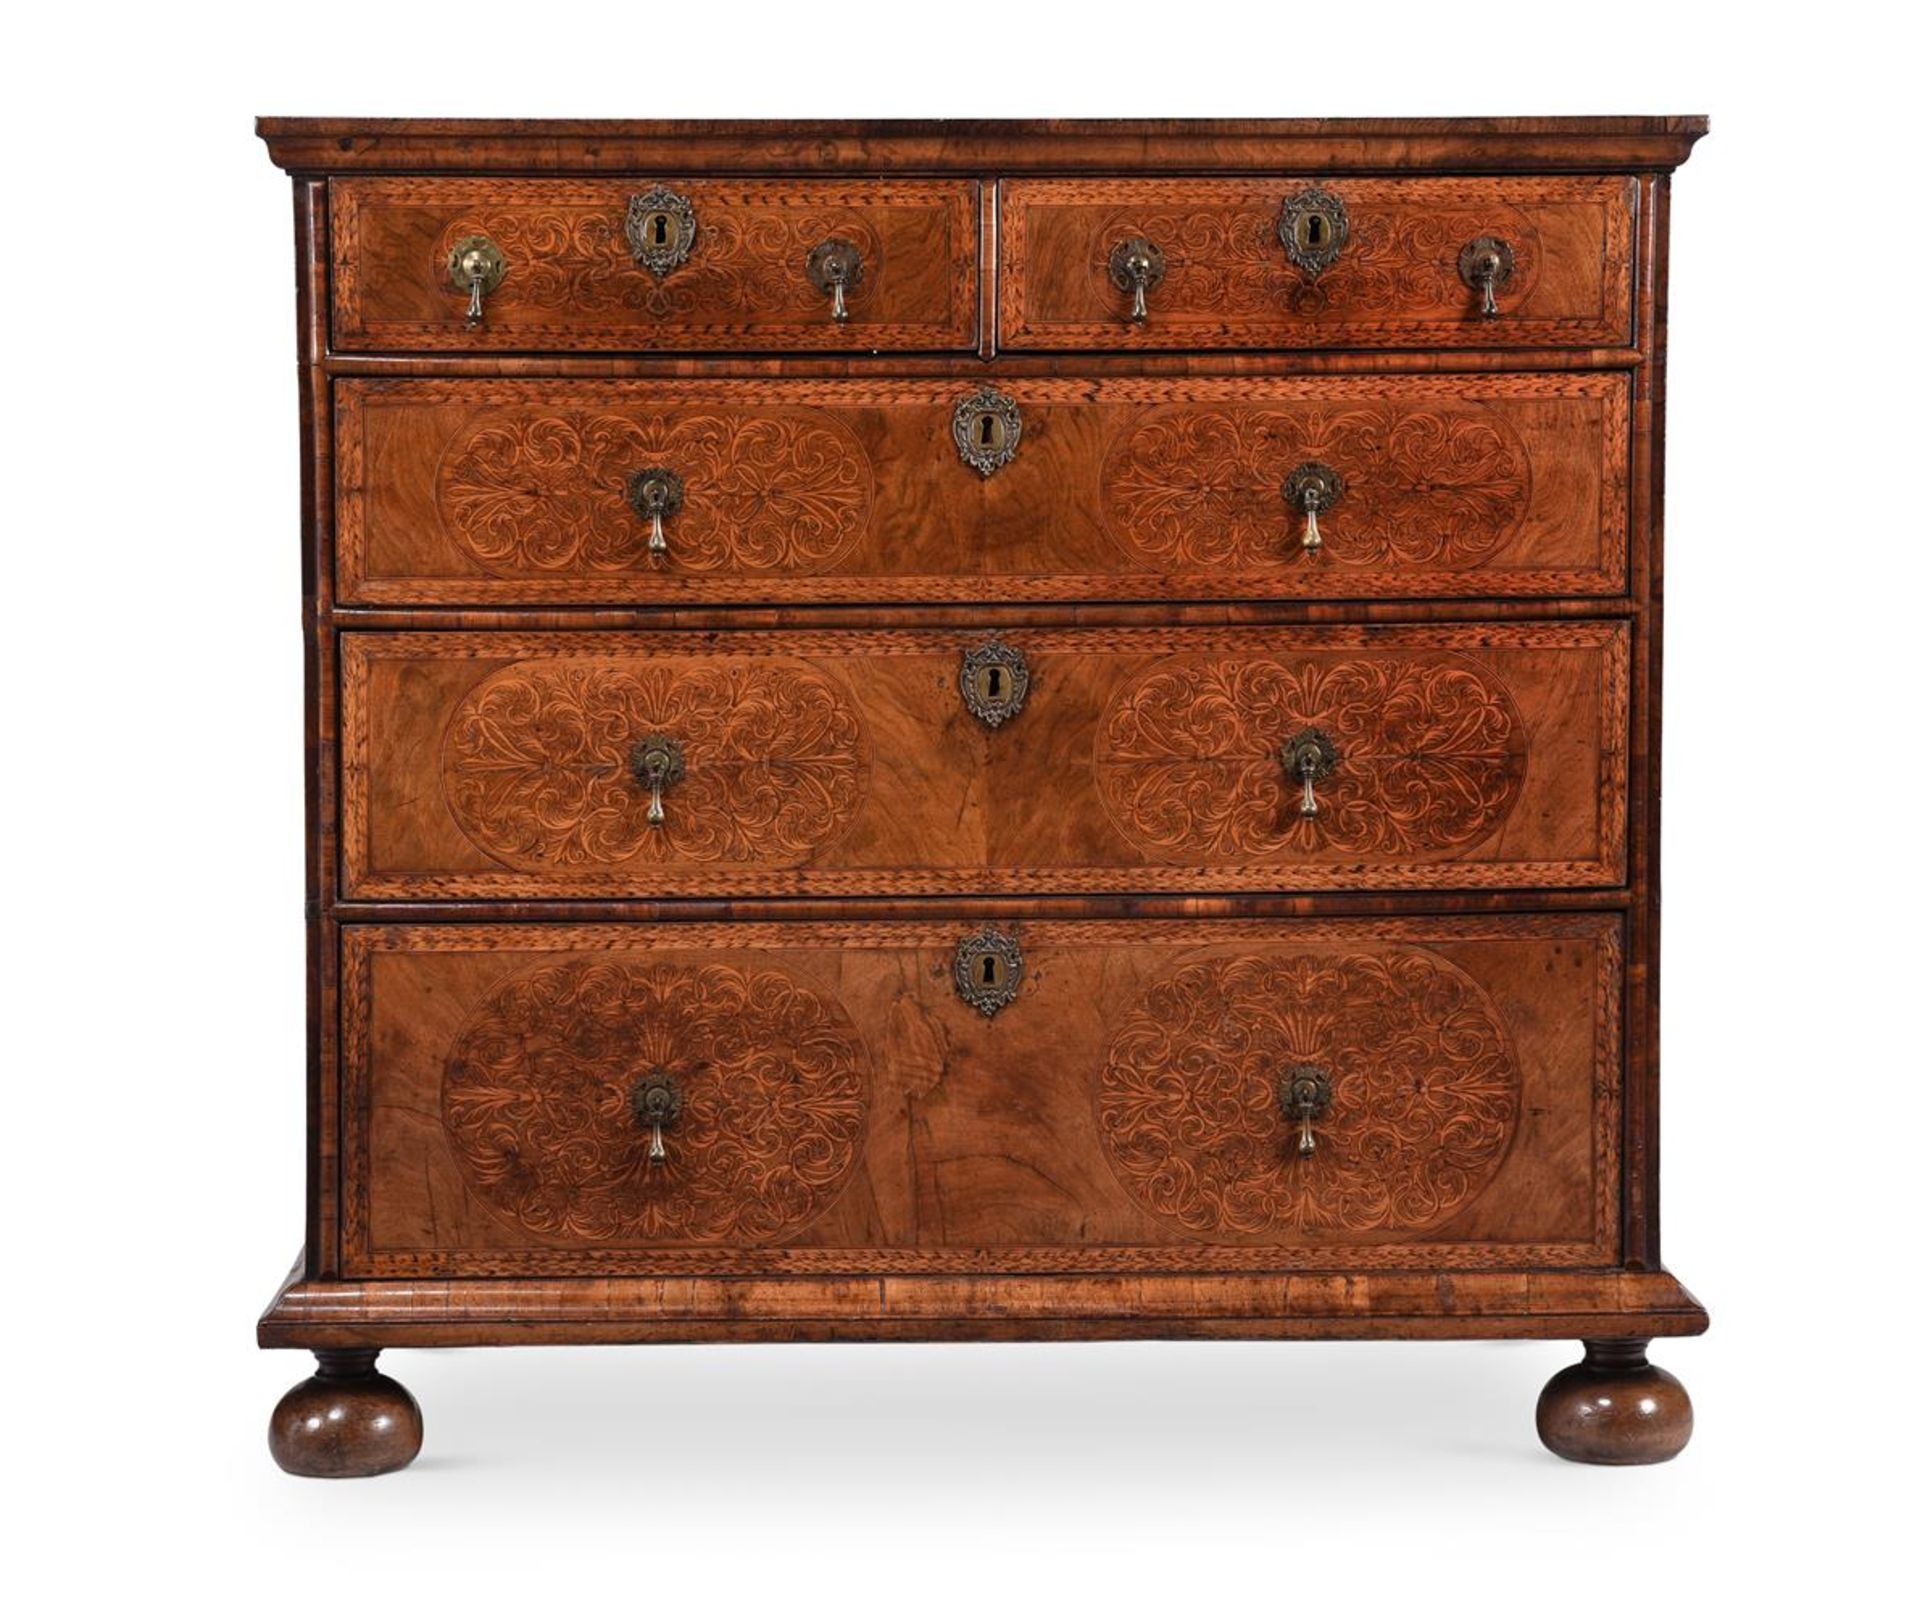 A WILLIAM & MARY WALNUT AND SEAWEED MARQUETRY CHEST OF DRAWERS, IN THE MANNER OF GERRIT JENSEN